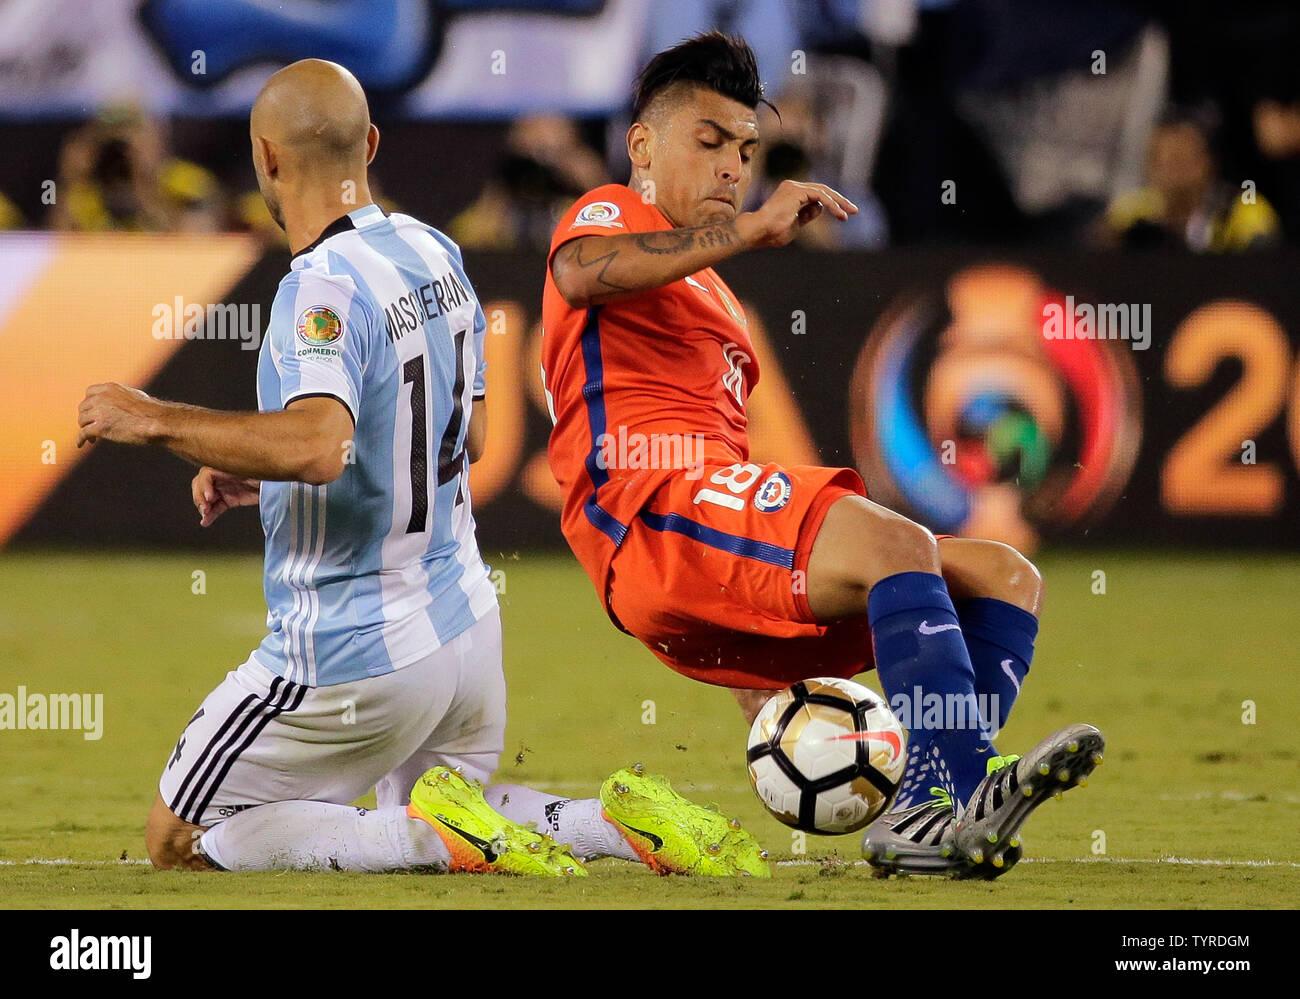 Chile defender Gonzalo Jara (18) steals the ball from Argentina midfielder Javier Mascherano (14) in overtime at the Copa America Centenario USA 2016 Finals at MetLife Stadium in East Rutherford, New Jersey on June 26, 2016.      Photo by Ray Stubblebine/UPI Stock Photo